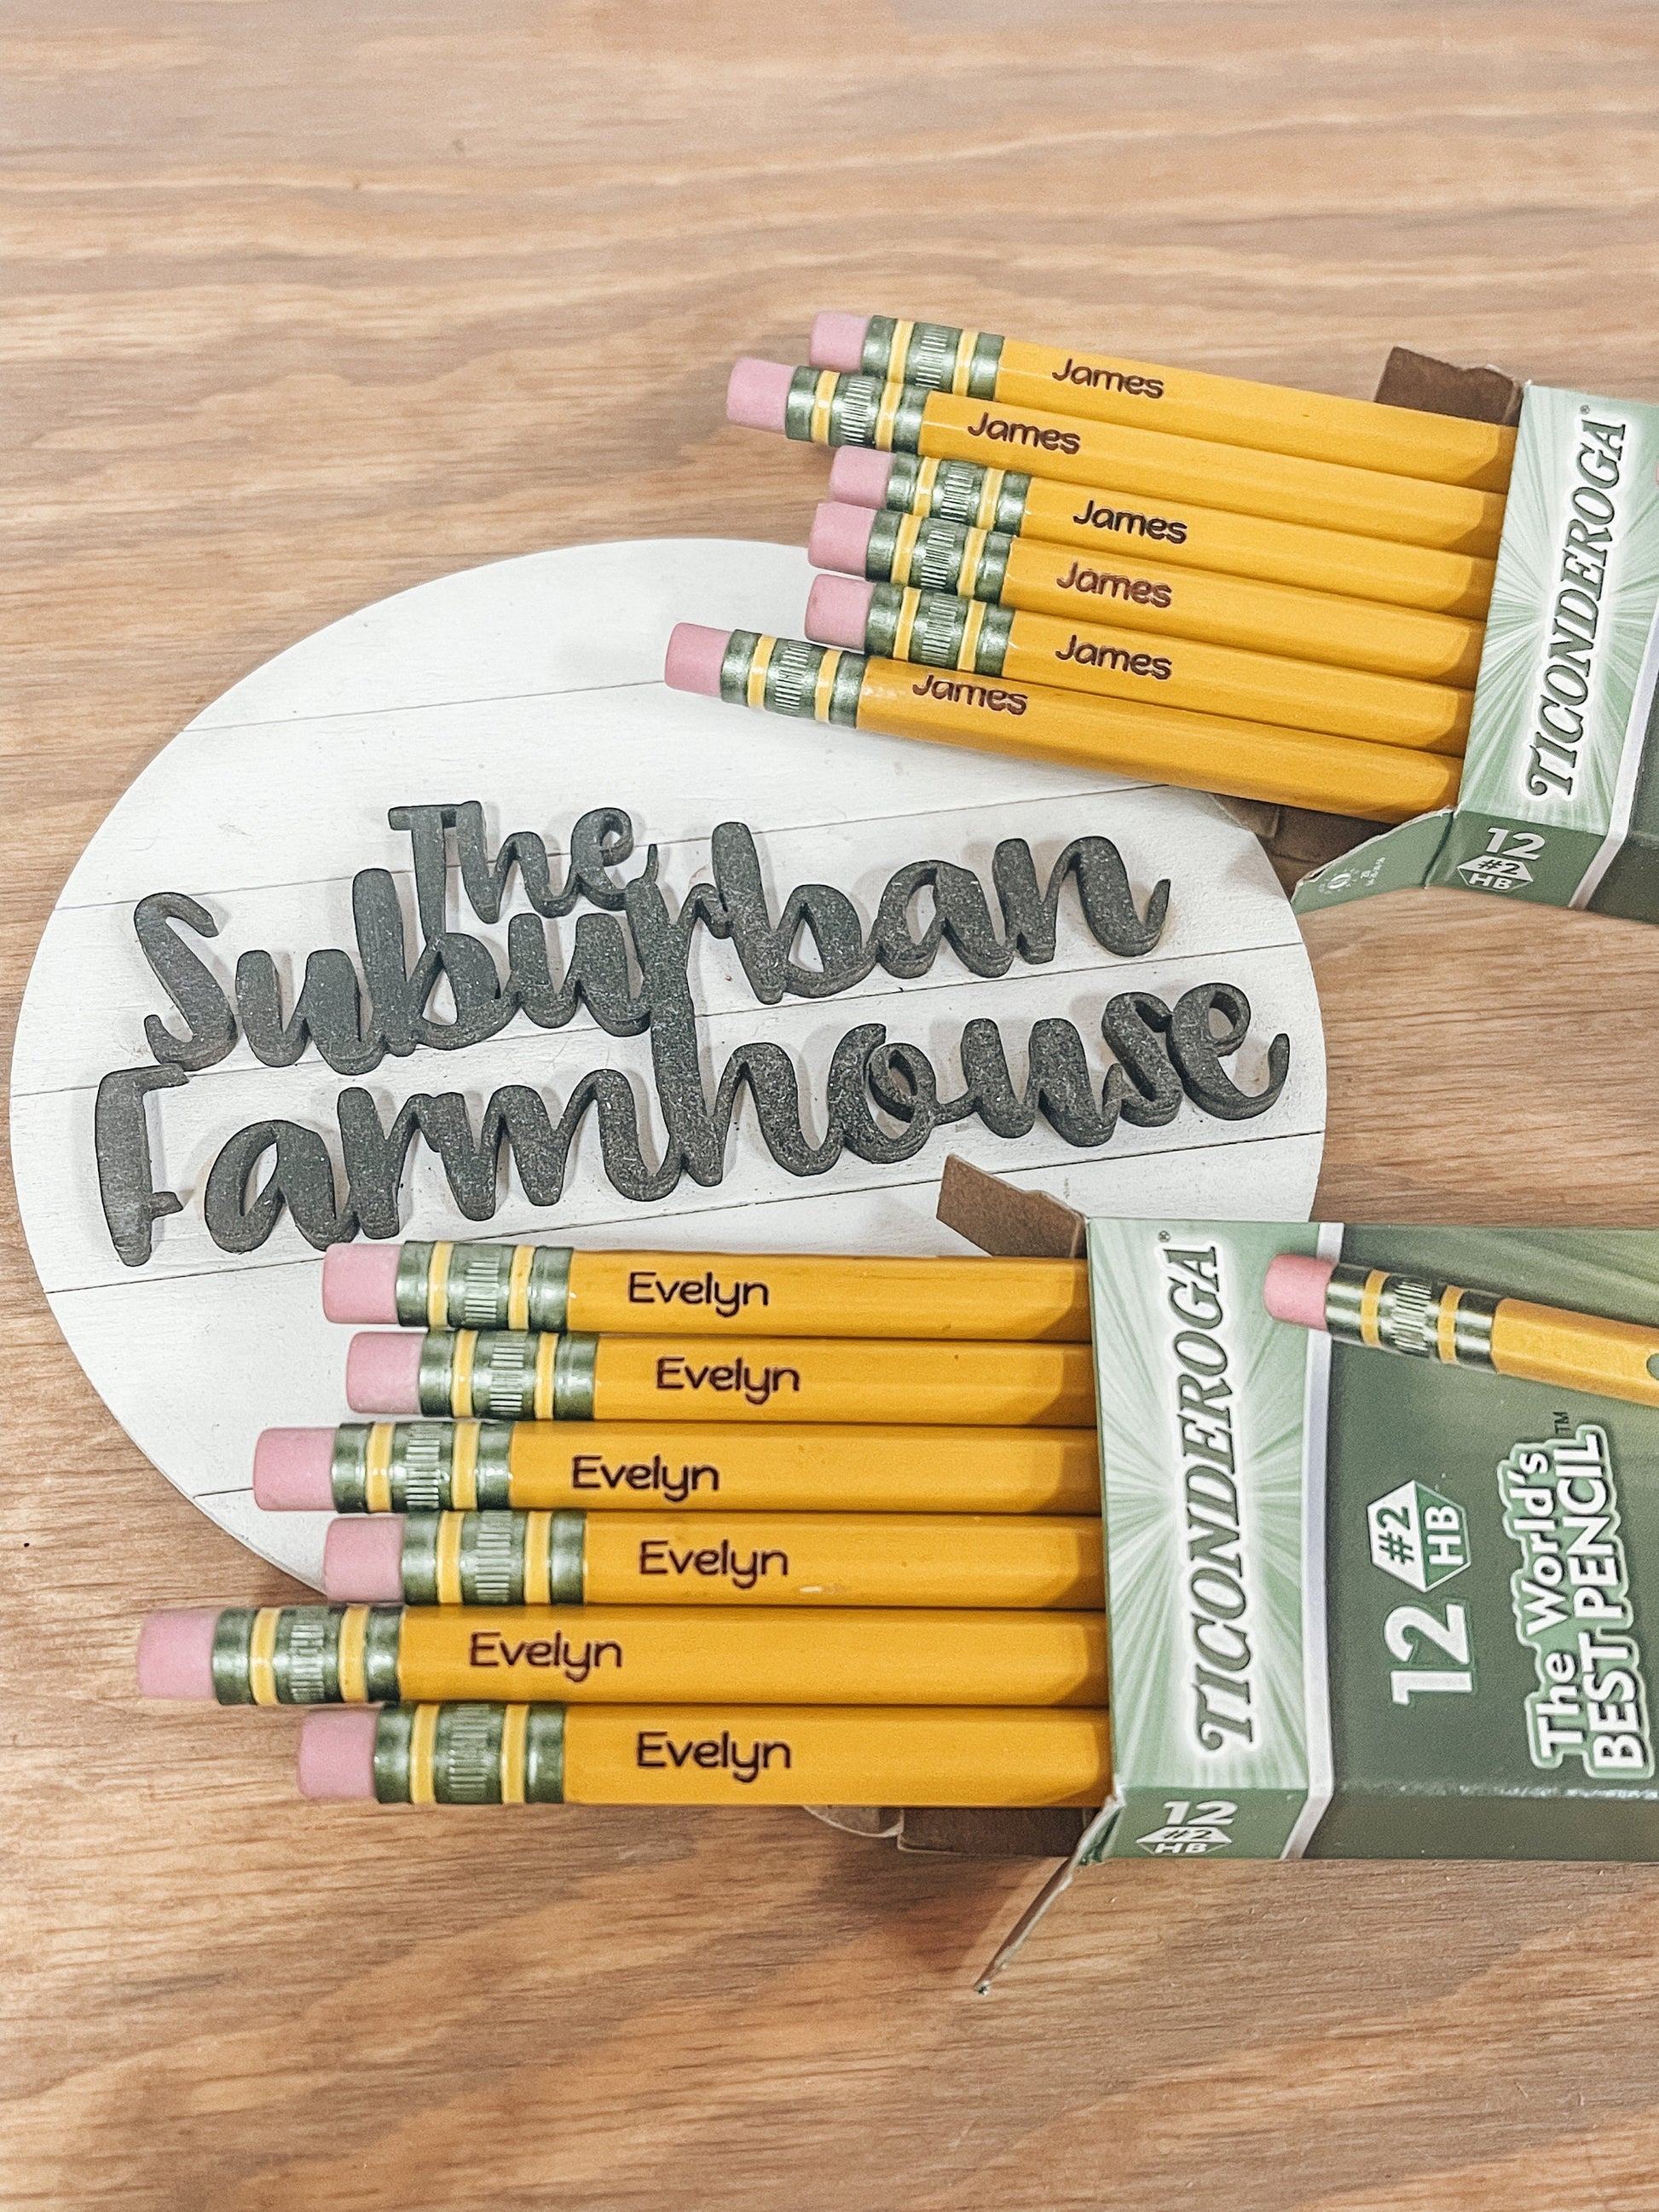 Engraved Personalized Colored Pencils Custom Engraved Crayola Pencils  Custom Engraved Colored Pencils Teacher Appreciation Gifts 